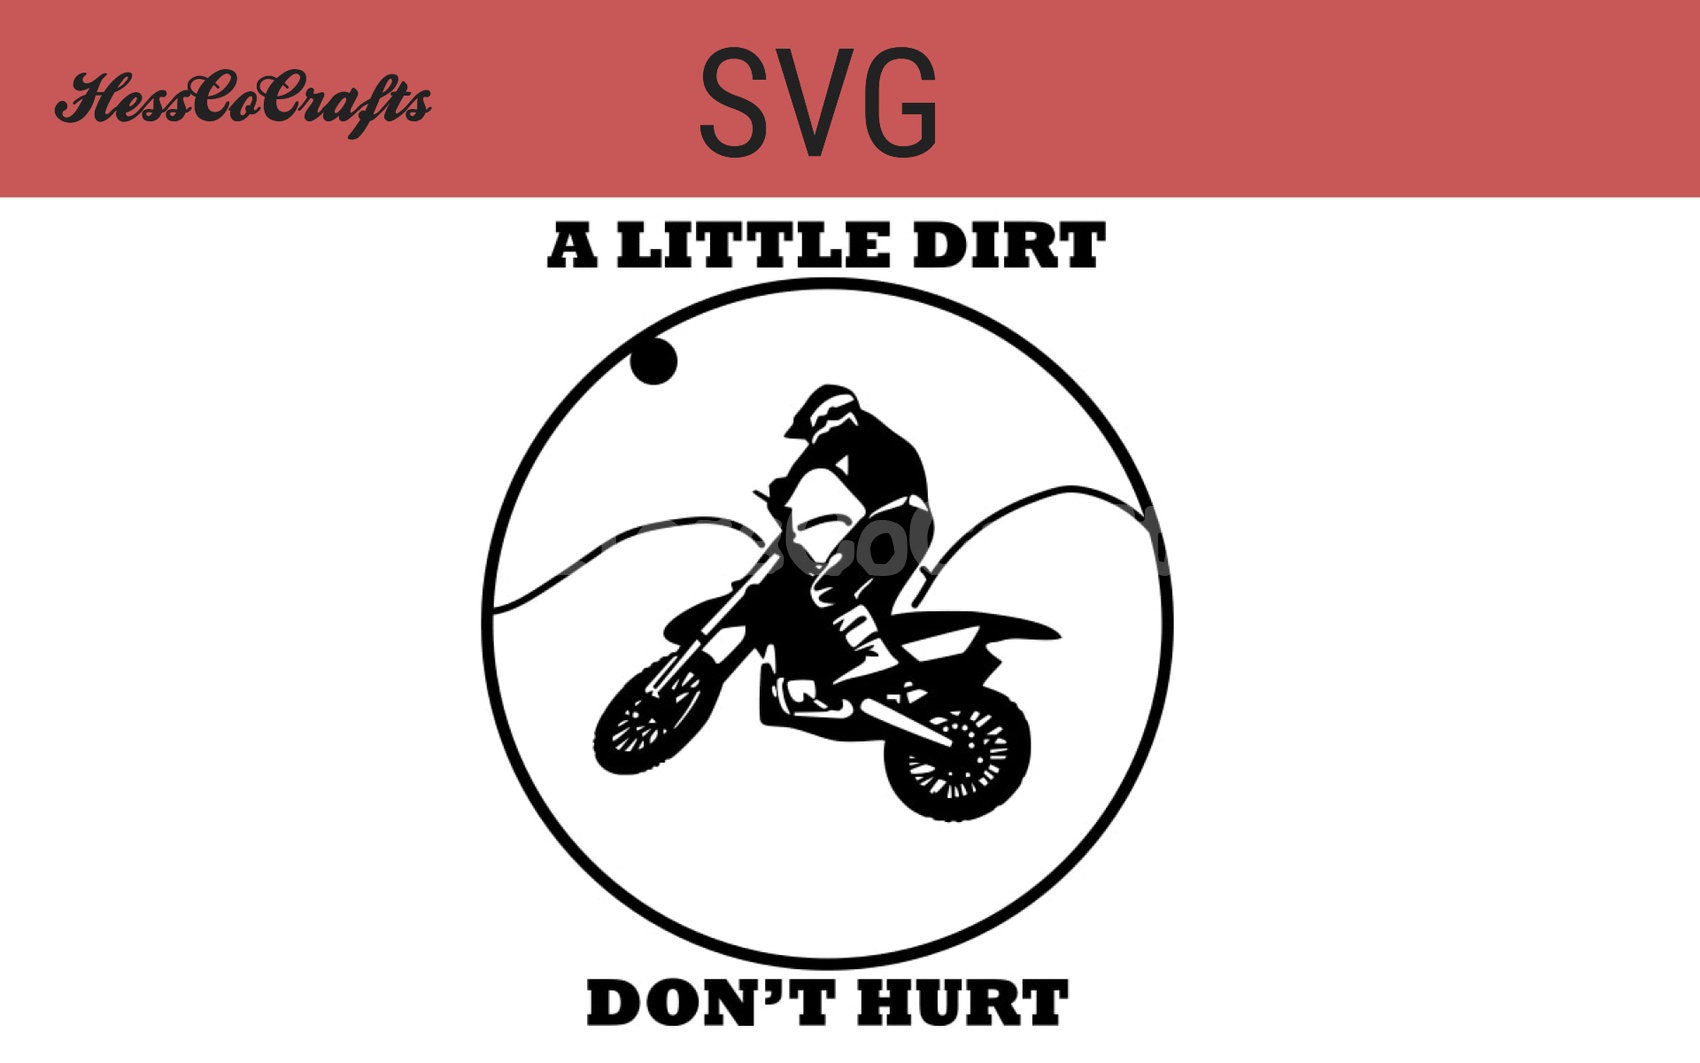 Red Fox Racing Svg Png online in USA